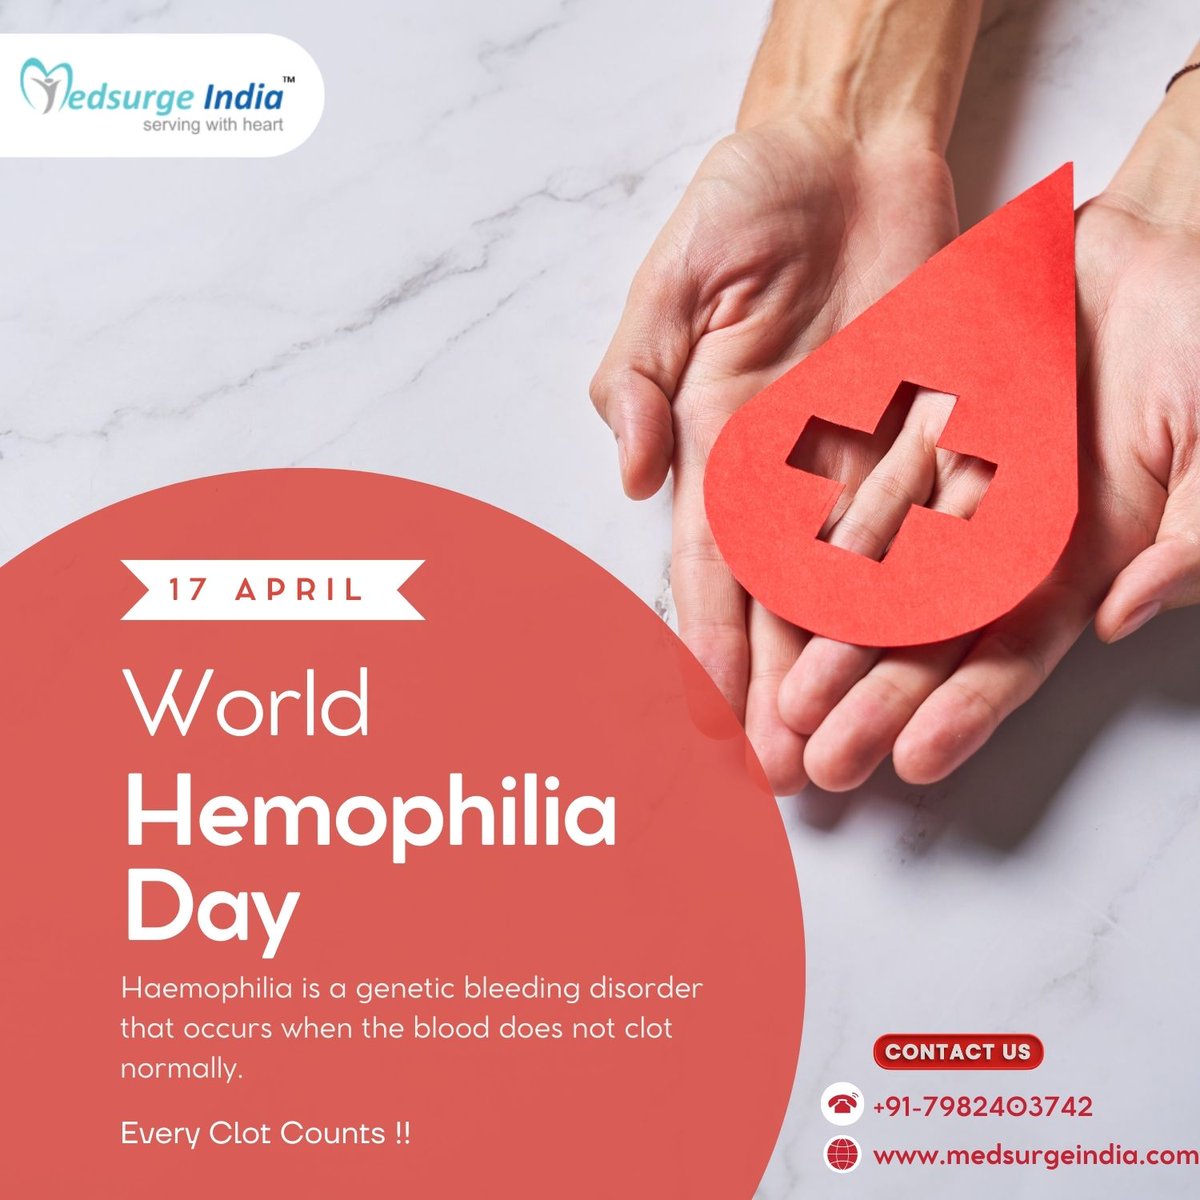 #Hemophilia is a clotting condition that causes the blood to clot slowly. Following an injury, #surgery, or tooth extraction, people with this syndrome experience persistent #bleeding or dribbling. Click - rb.gy/vnmrwx #WorldHaemophiliaDay #blooddisorder #bleeding